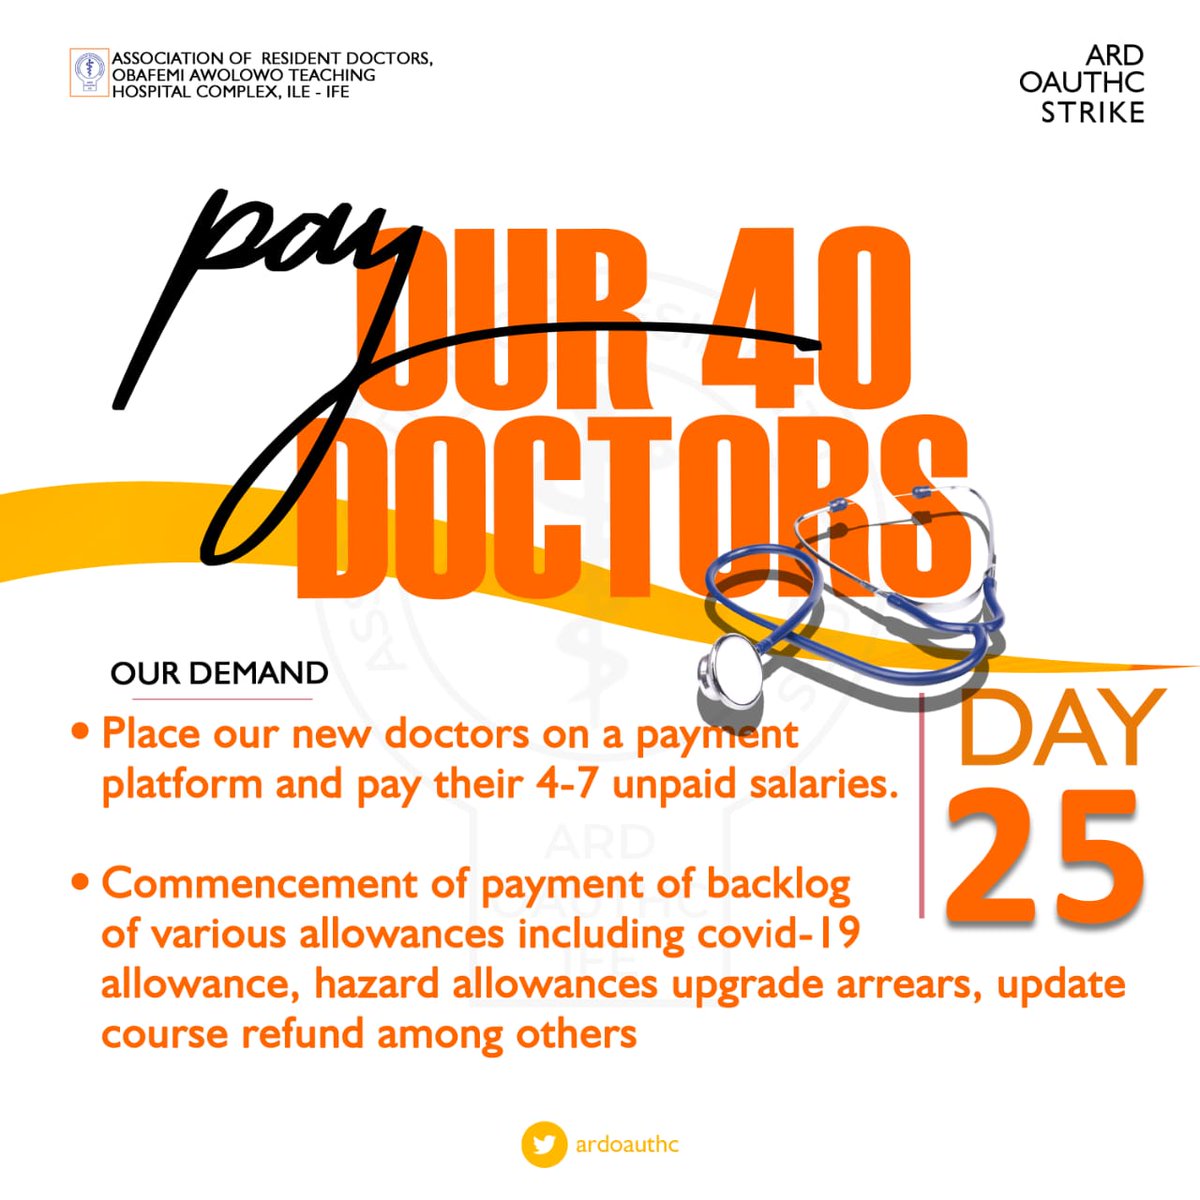 ONE DOCTOR TO 10,000 PATIENTS. Despite this ratio, 40 dedicated doctors have worked unpaid for 4-7 months,. 🥲 @Fmohnigeria it's imperative to resolve this crisis and fast-track the inclusion of our doctors on the IPPIS platform. Pay #ARDOAUTHC40s now! #NARDStrike.

BREAKING NEWS